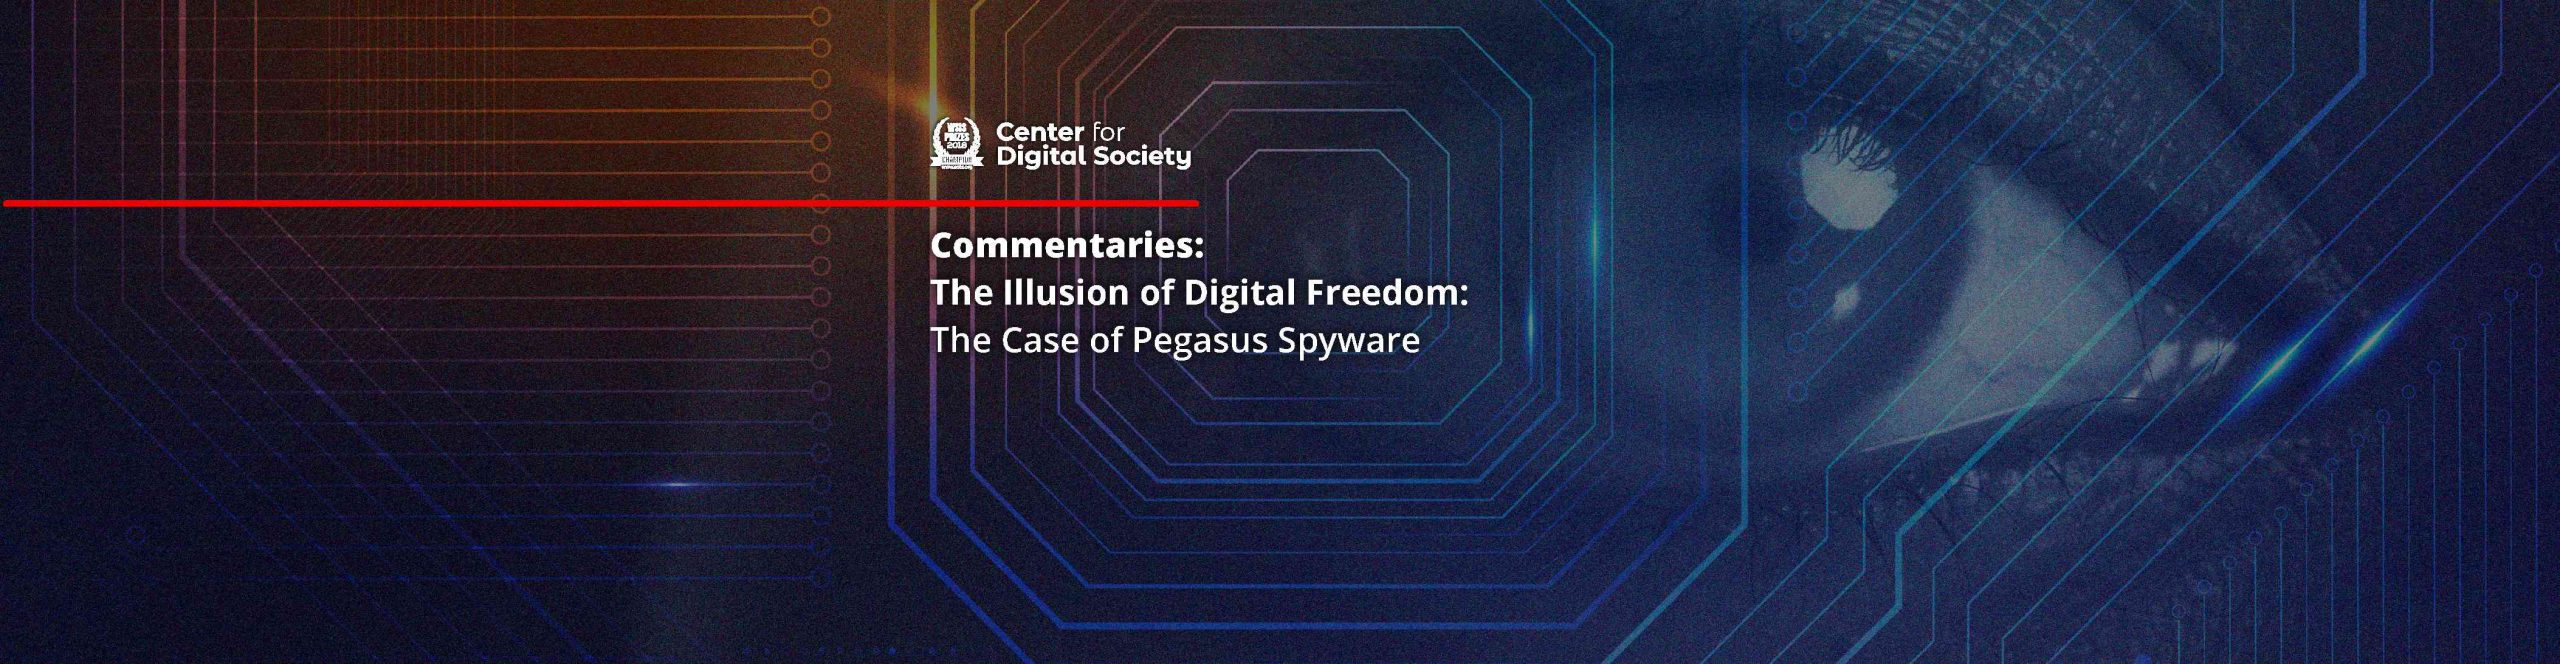 The Illusion of Digital Freedom: The Case of Pegasus Spyware